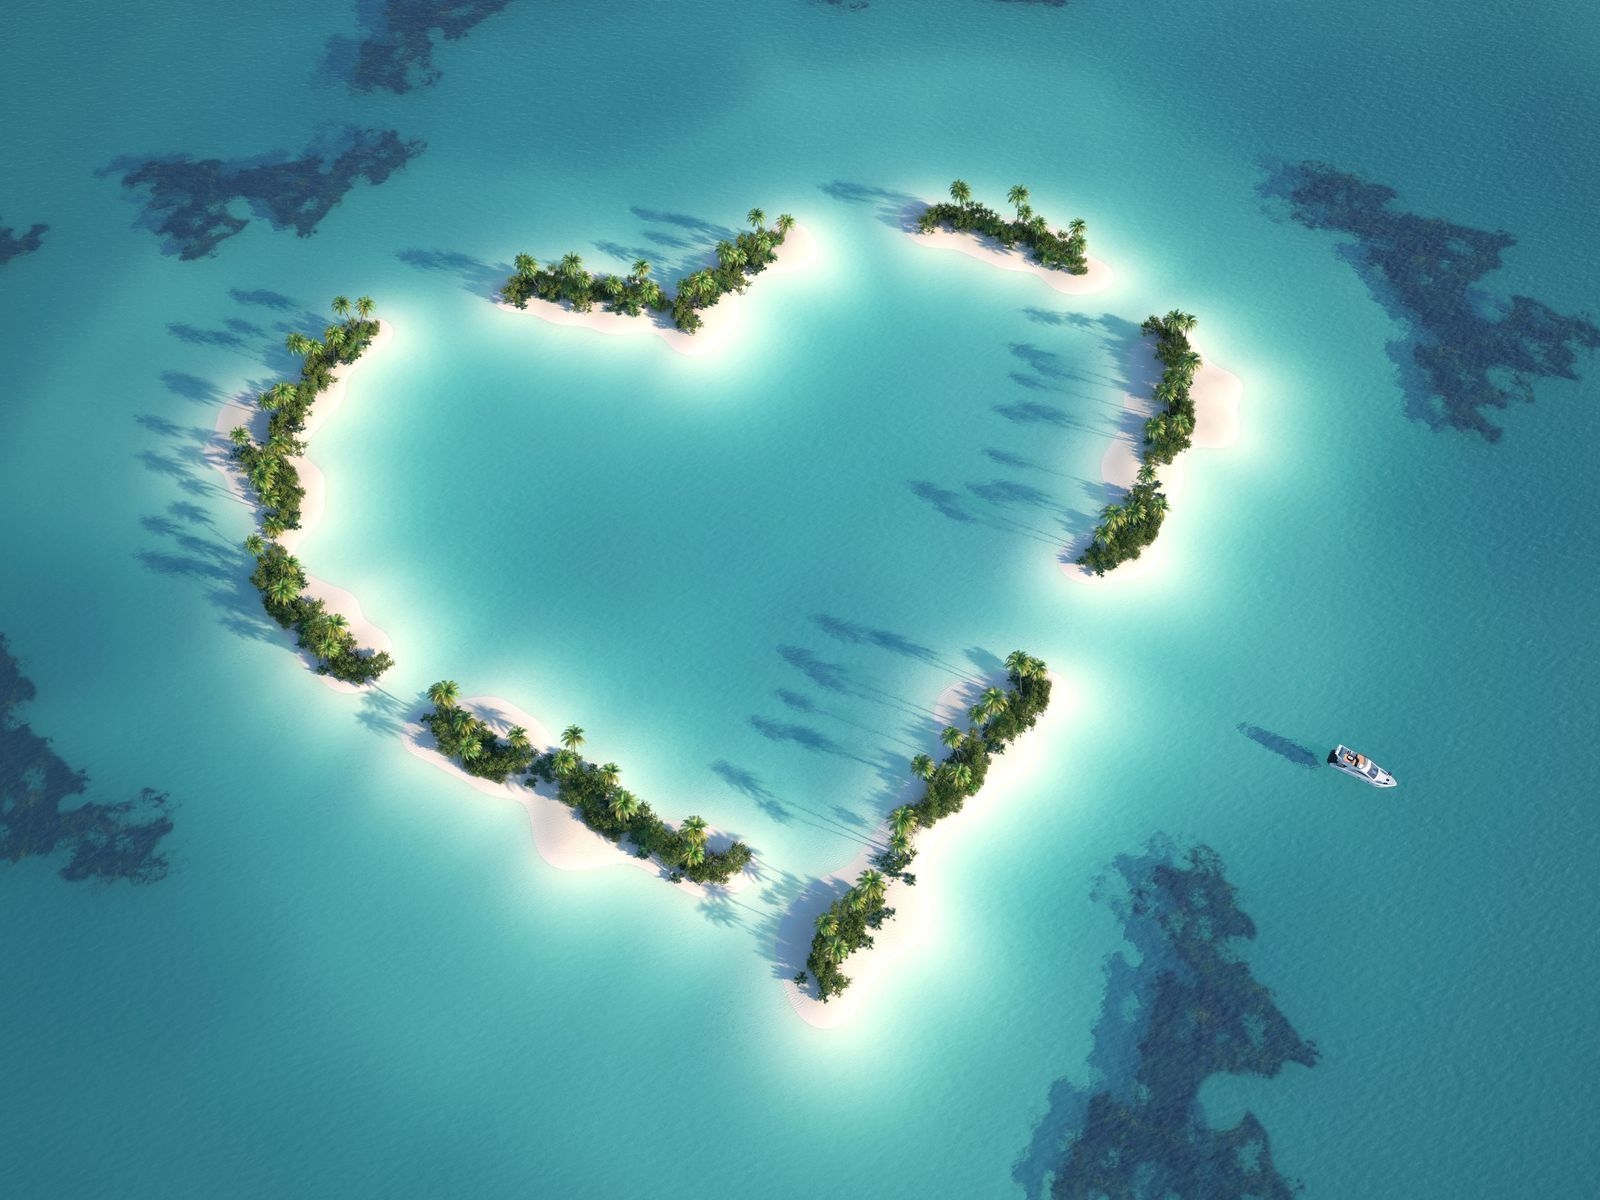 The Love Island for 1600 x 1200 resolution